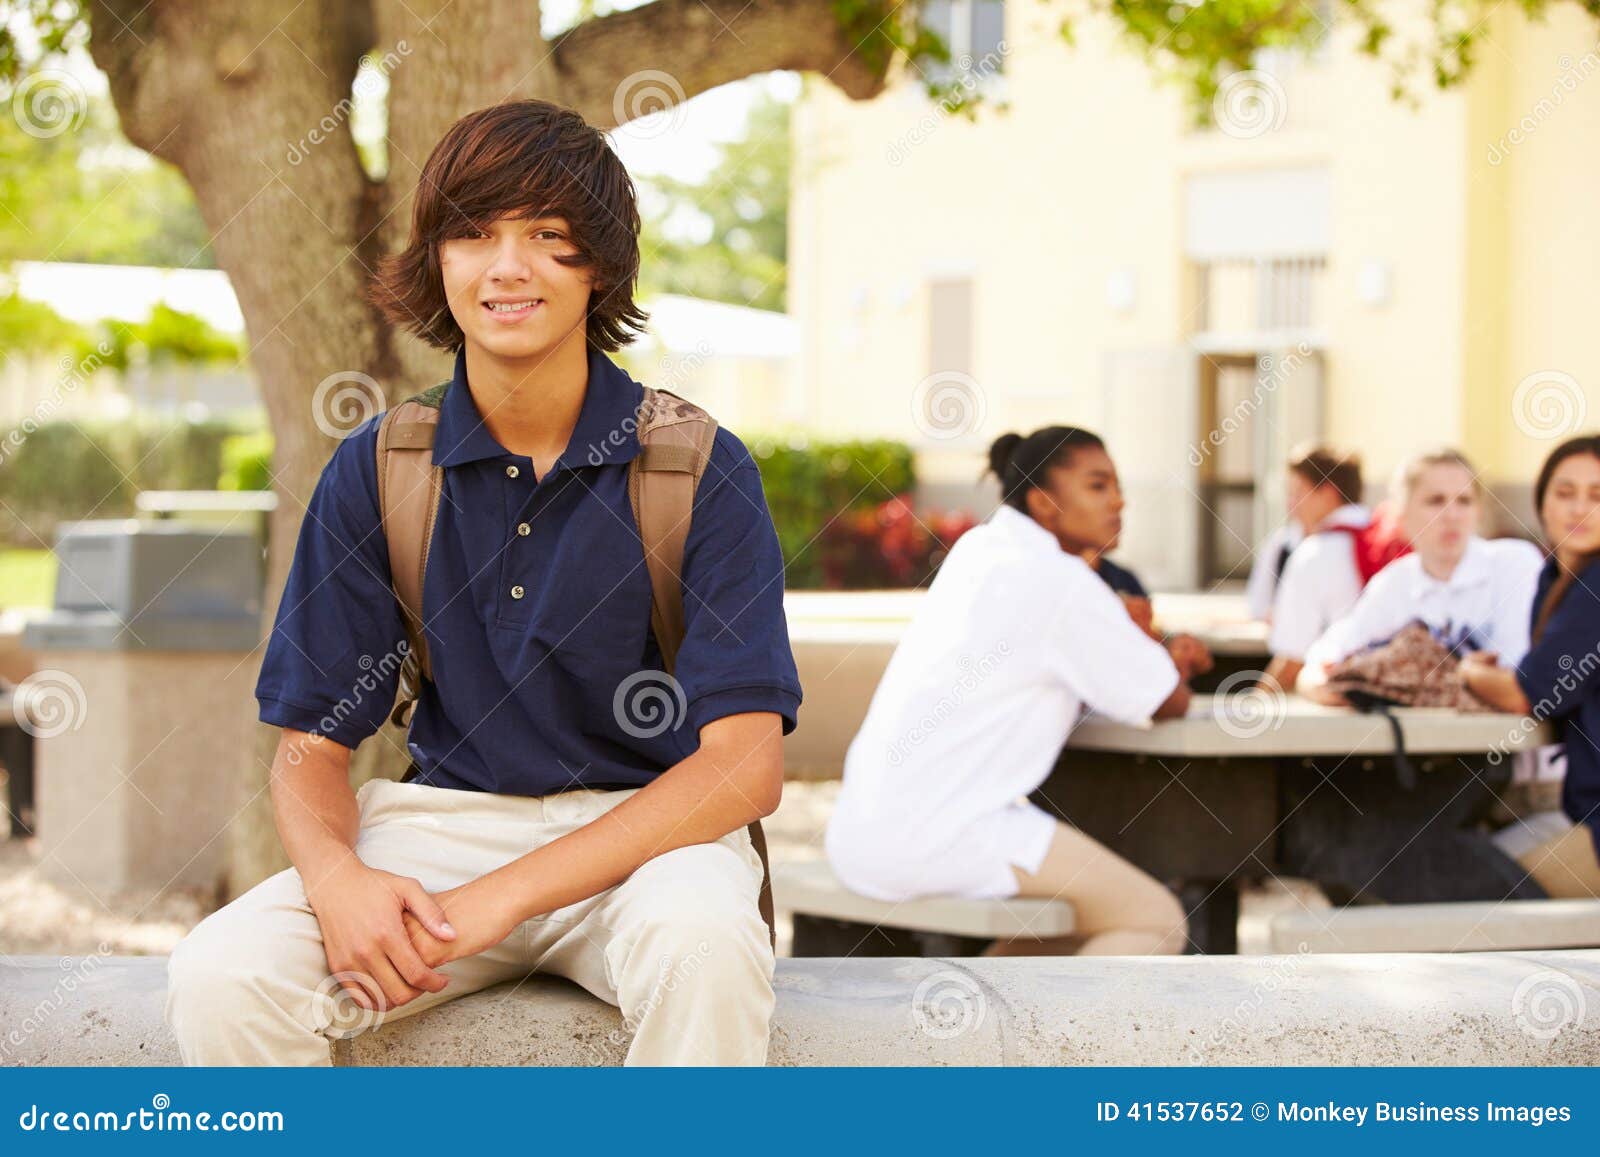 portrait male high school student wearing uniform people background 41537652 - Compared - Significant Aspects For custom writing org review